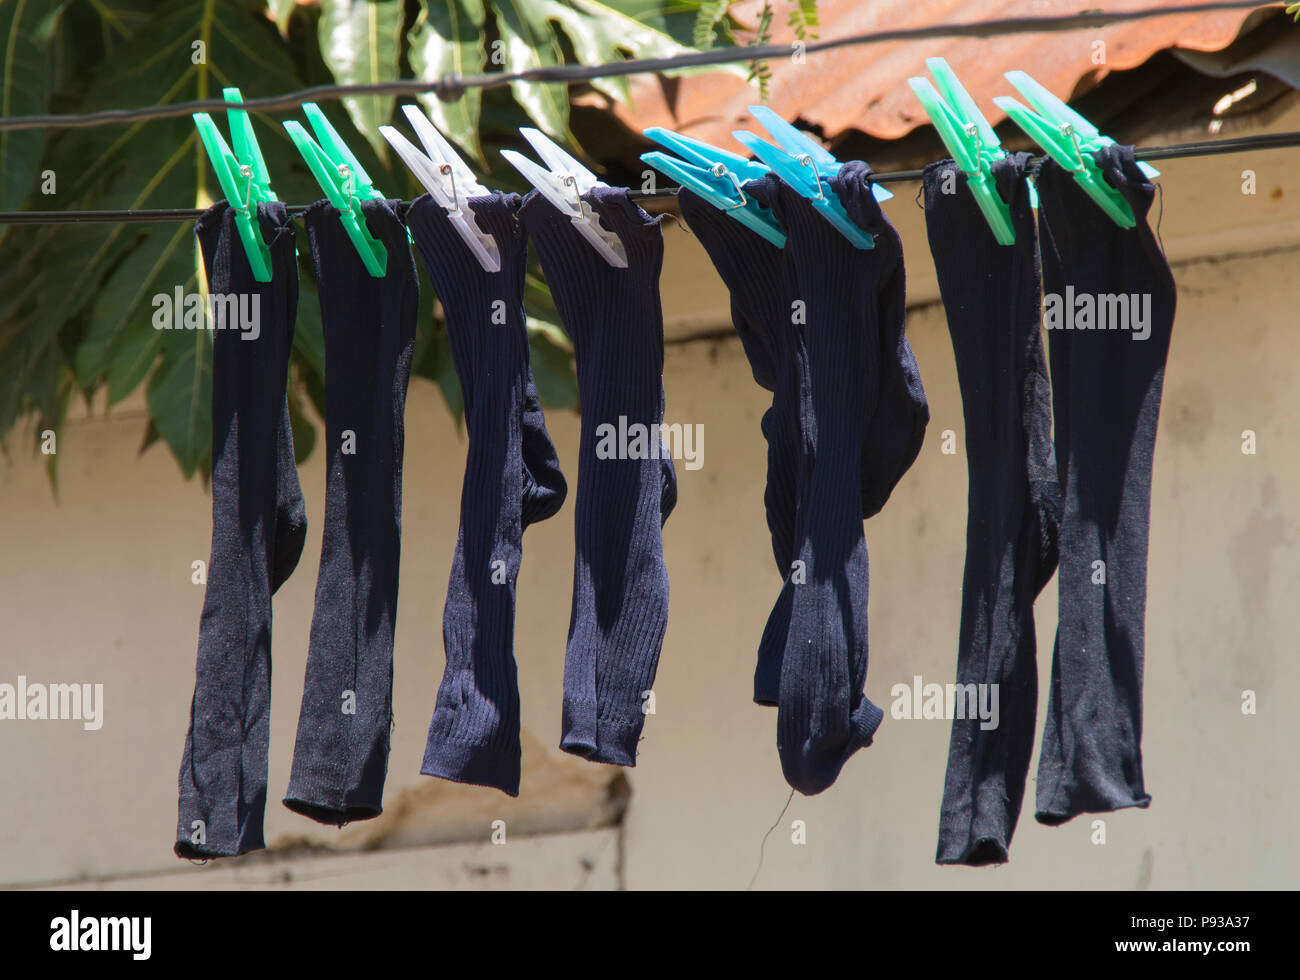 Old red socks hanging on rope attached with clothespins to dry